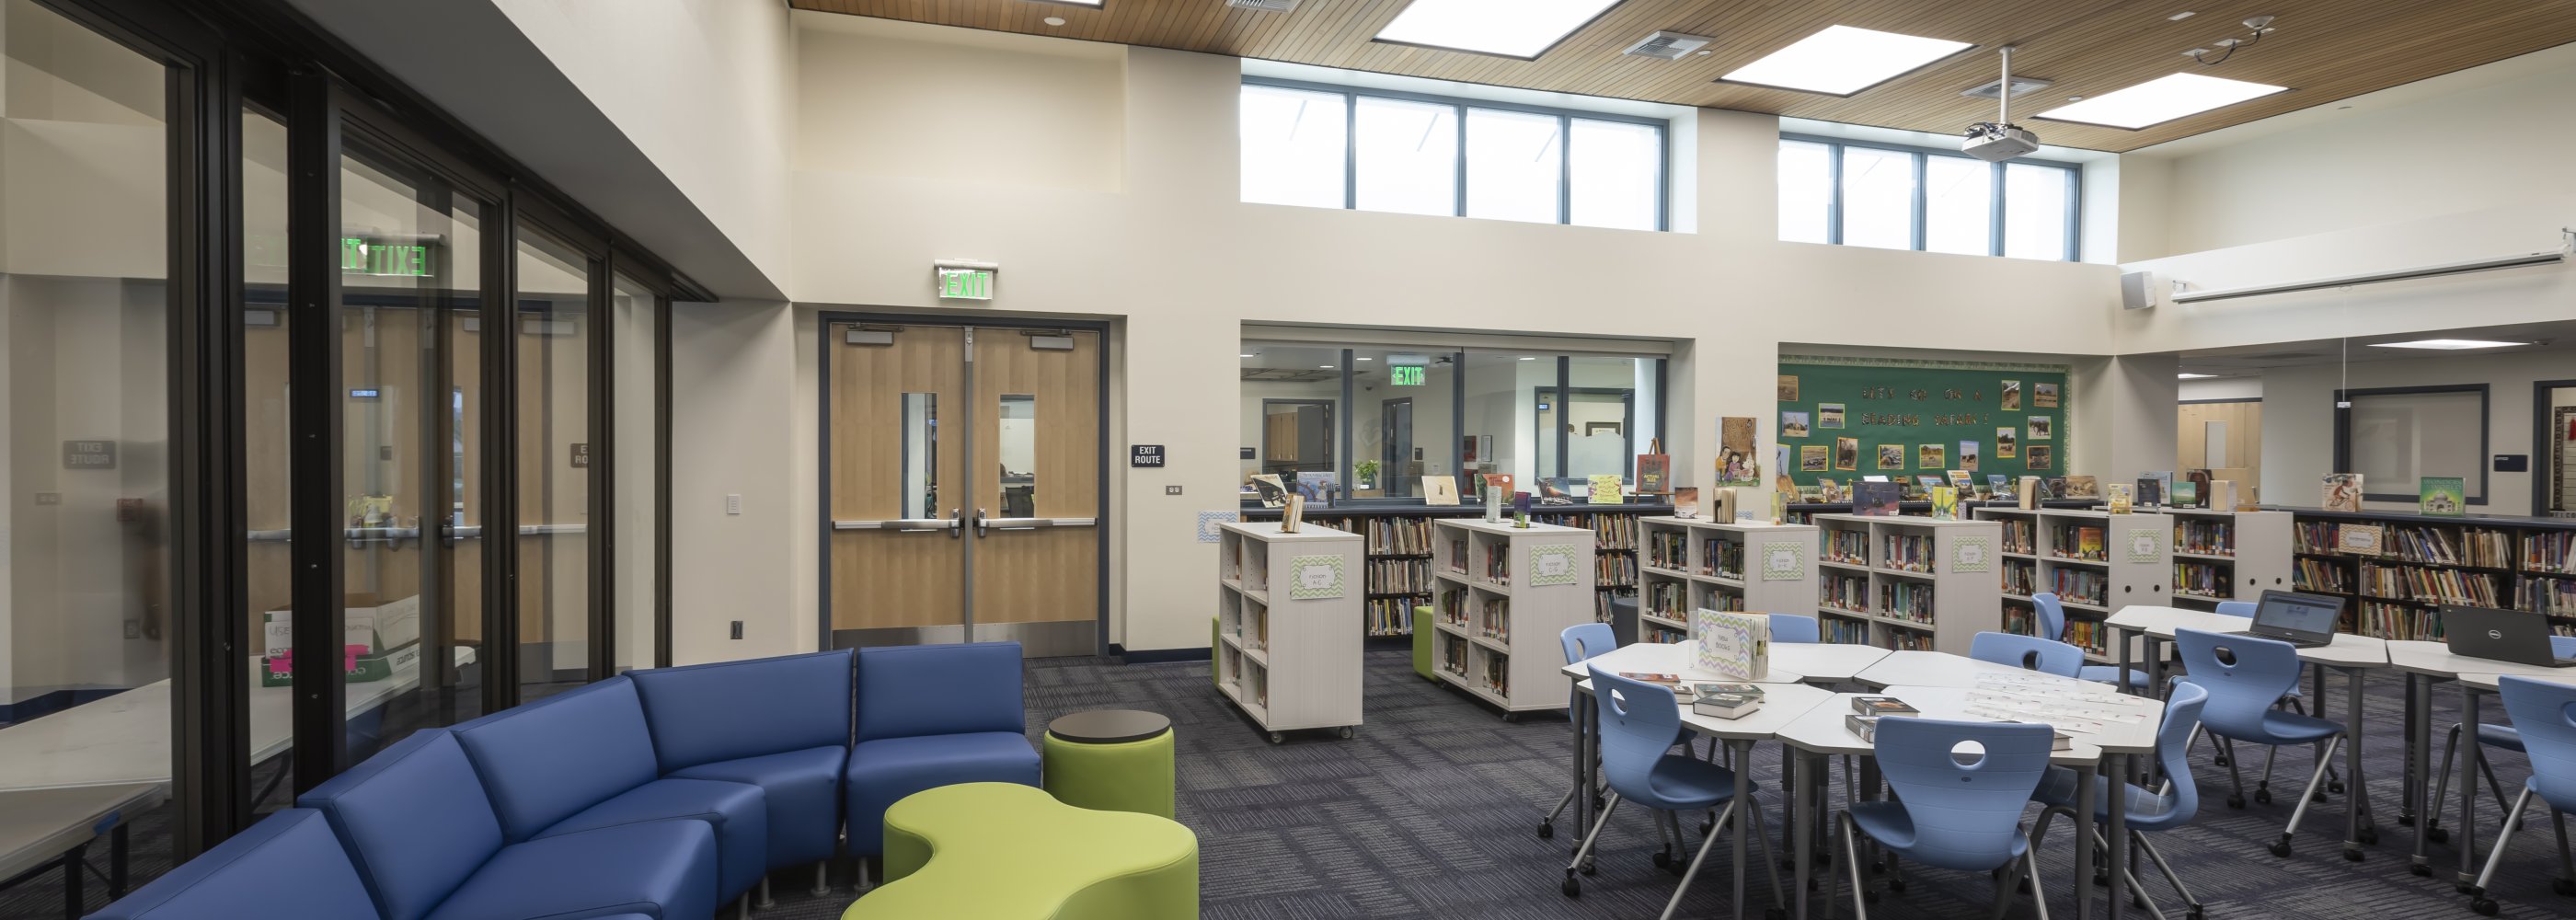 Brywood Library Seating Area